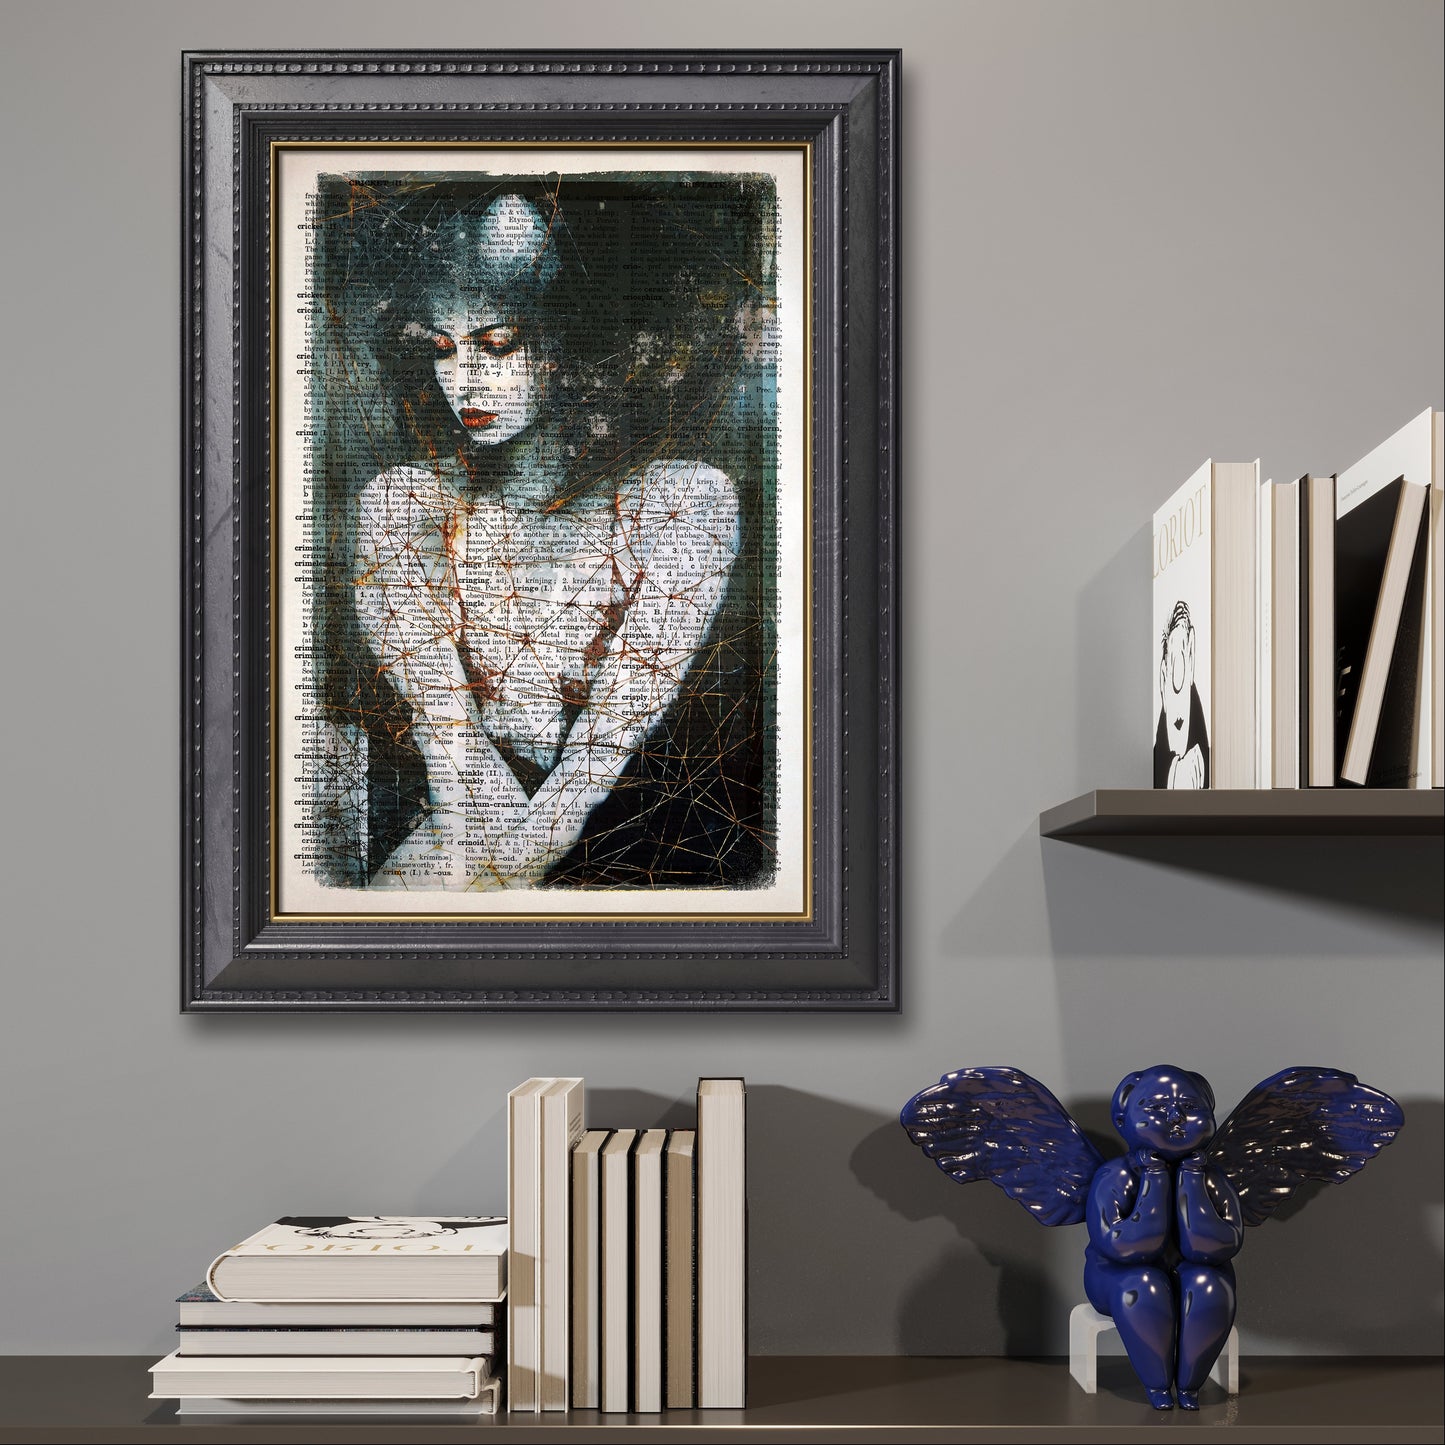 Capturing emotions on a vintage canvas: Entwined Melancholy Dreams print.